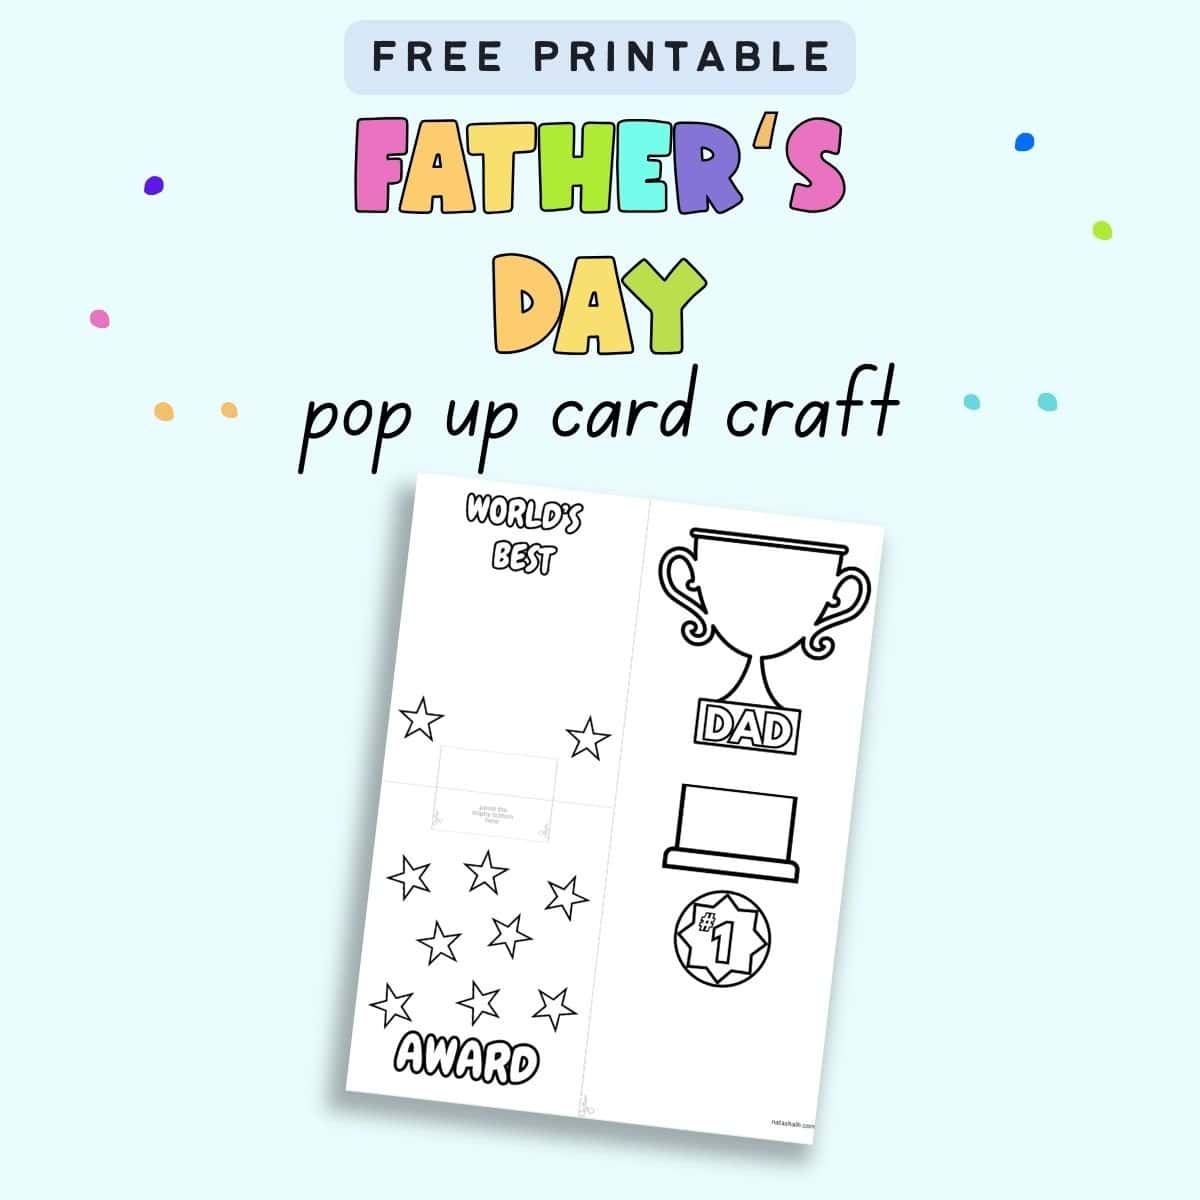 Text "Free printable Father's Day pop up card" with a preview of a pop up card printable page.